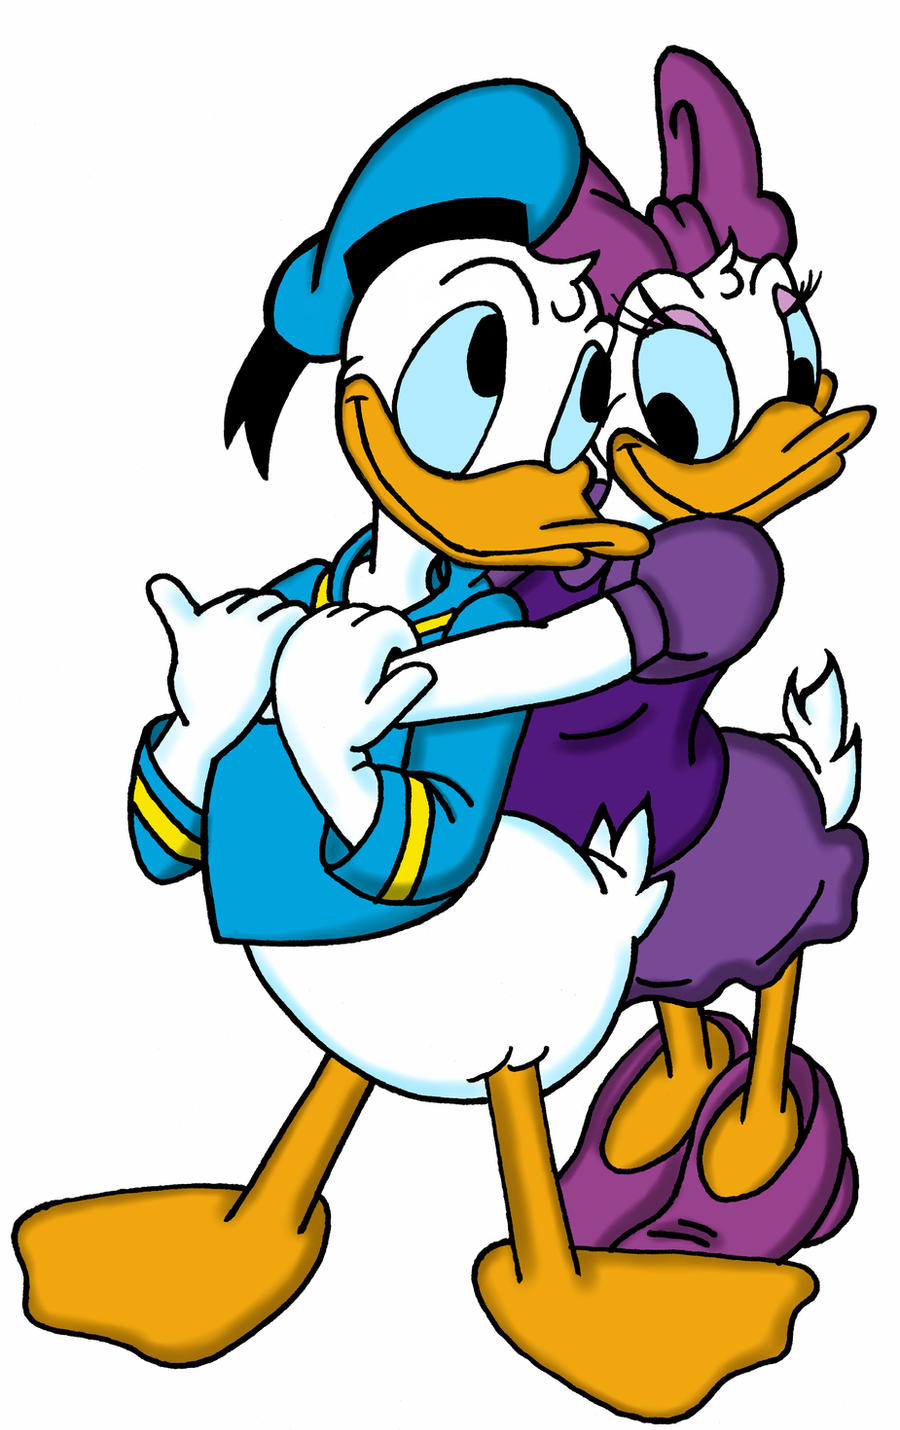 Donald Duck And Daisy Duck In Love Images & Pictures - Becuo